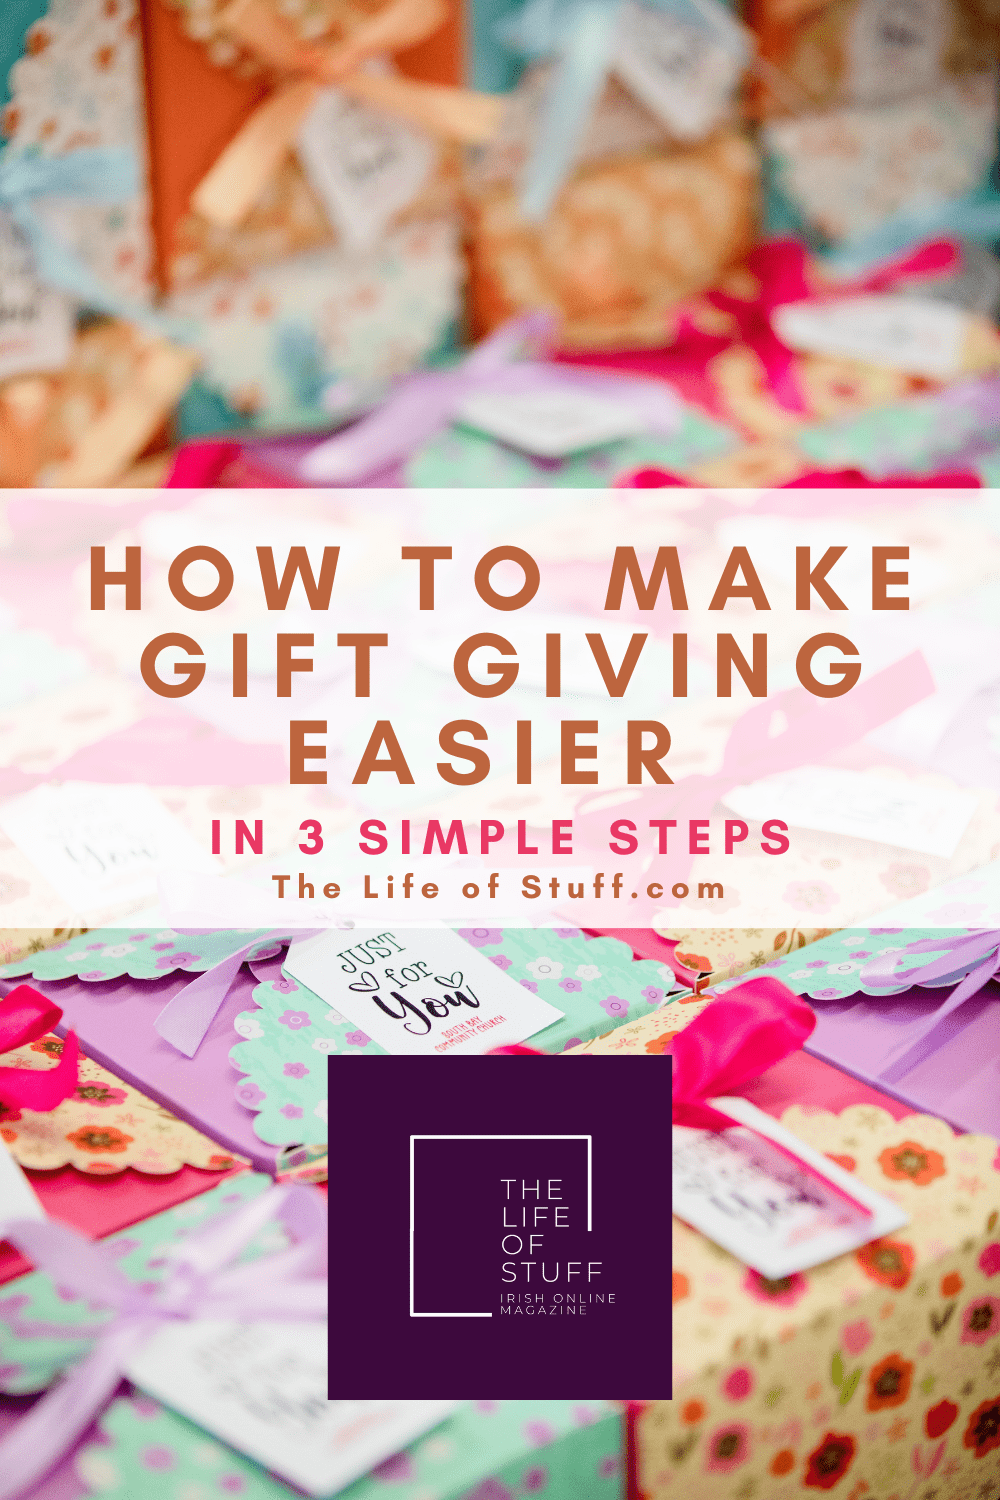 How To Make Gift Giving Easier in 3 Simple Steps - The Life of Stuff website